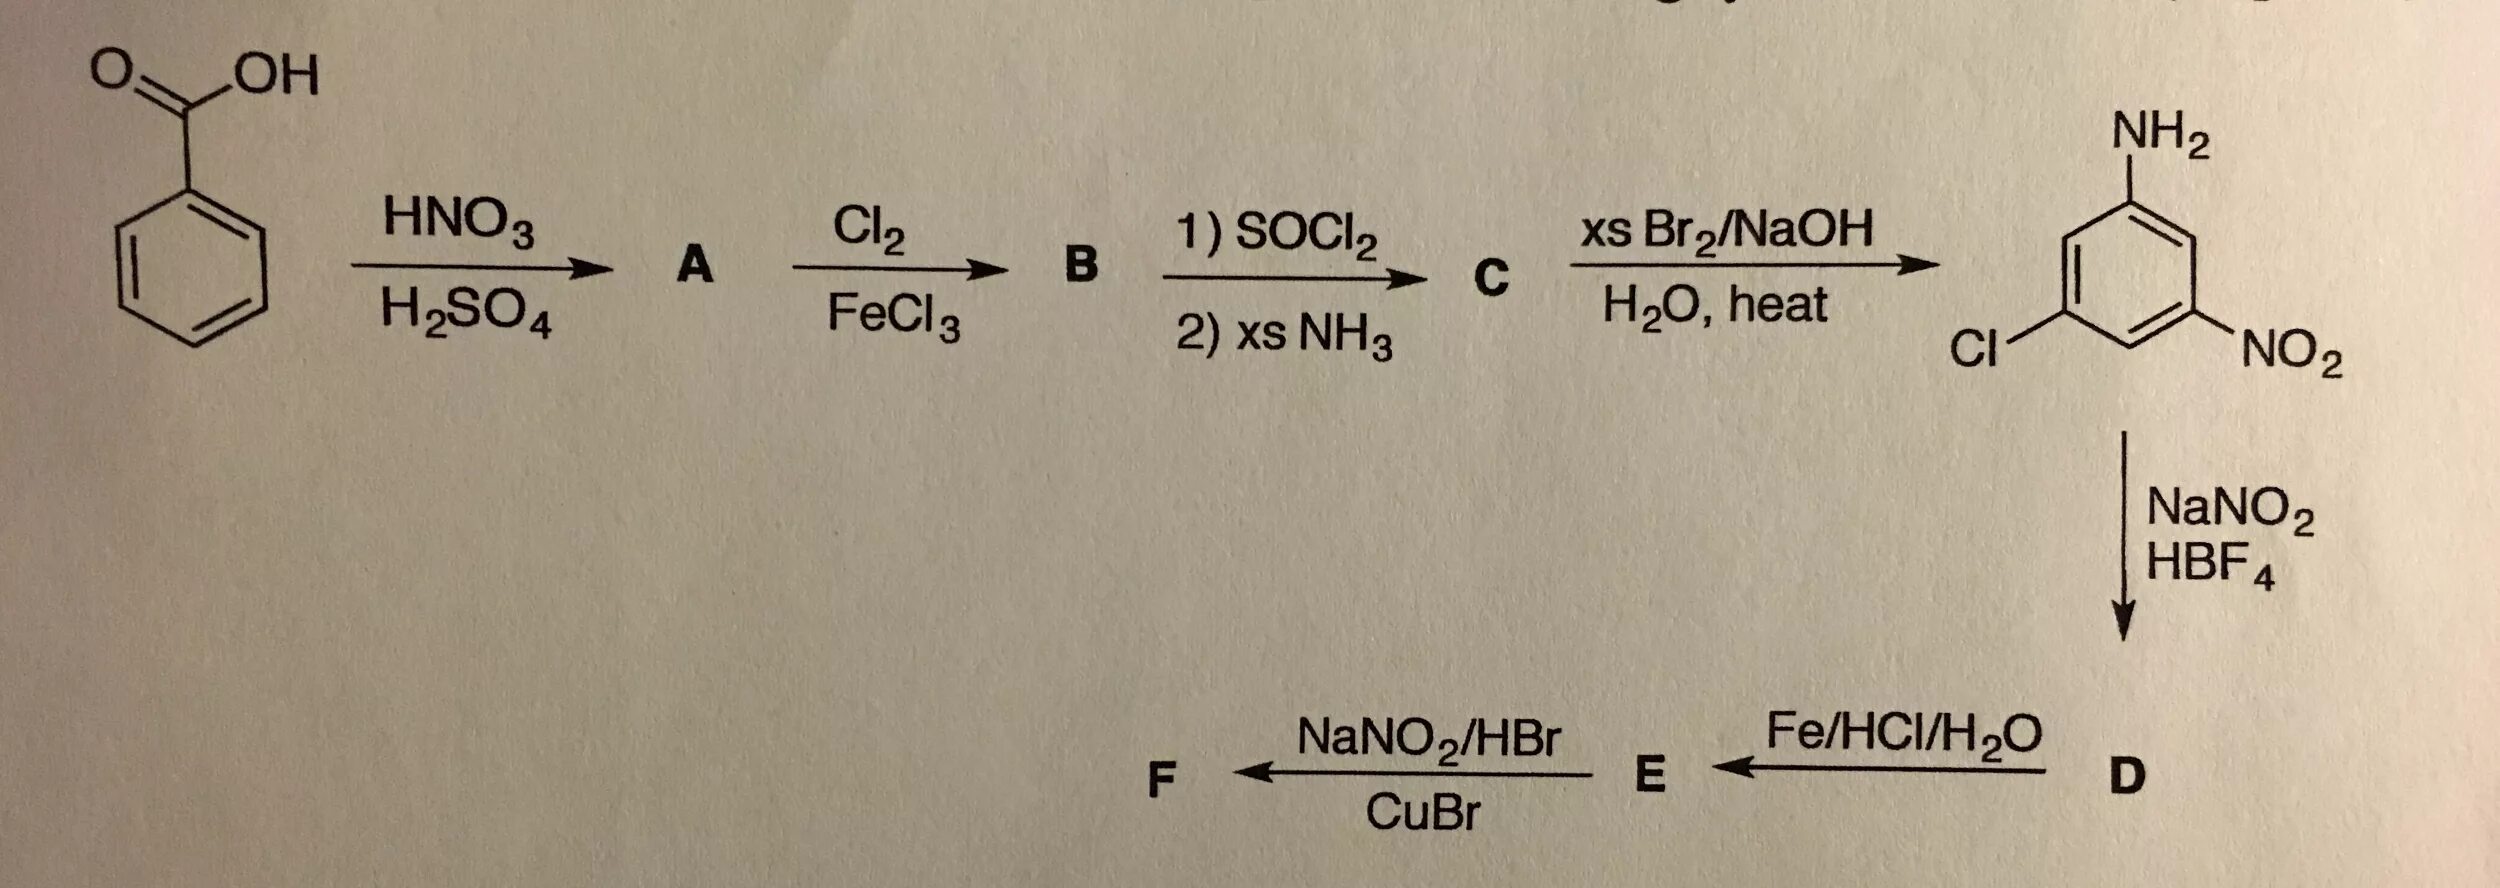 Ch3nh3br + hno2. Бензол hno2. Метилбензол + 2cl2 al2o3. Hno3 h2so4. Hno2 cl2 hno3 hcl